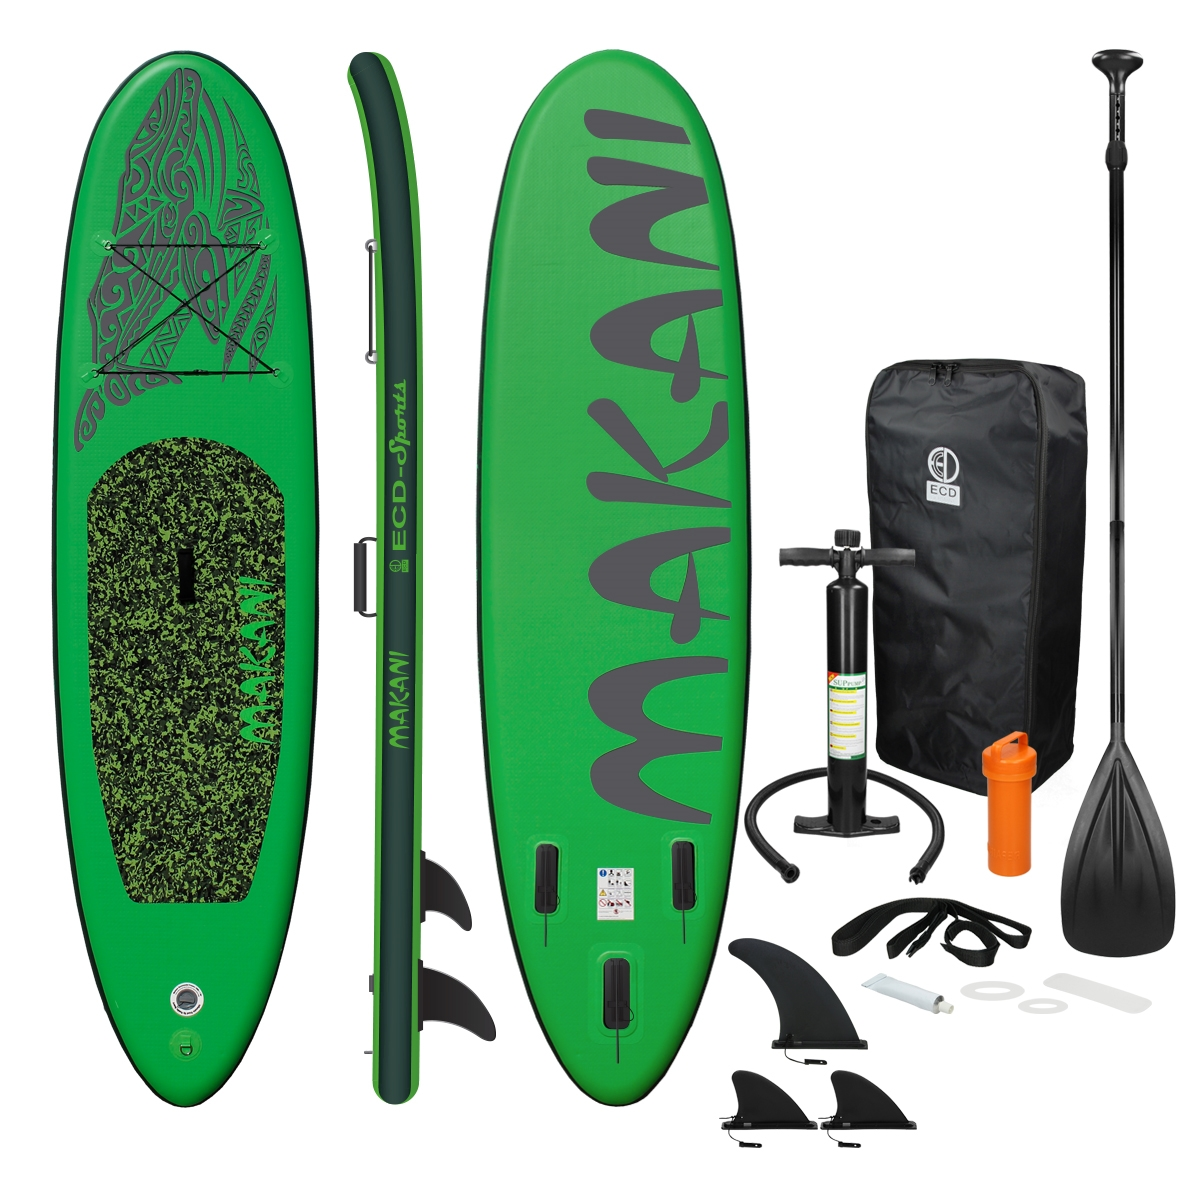 ECD-GERMANY Aufblasbares Green Stand Grün Up Paddle, Stand Board Paddle Up